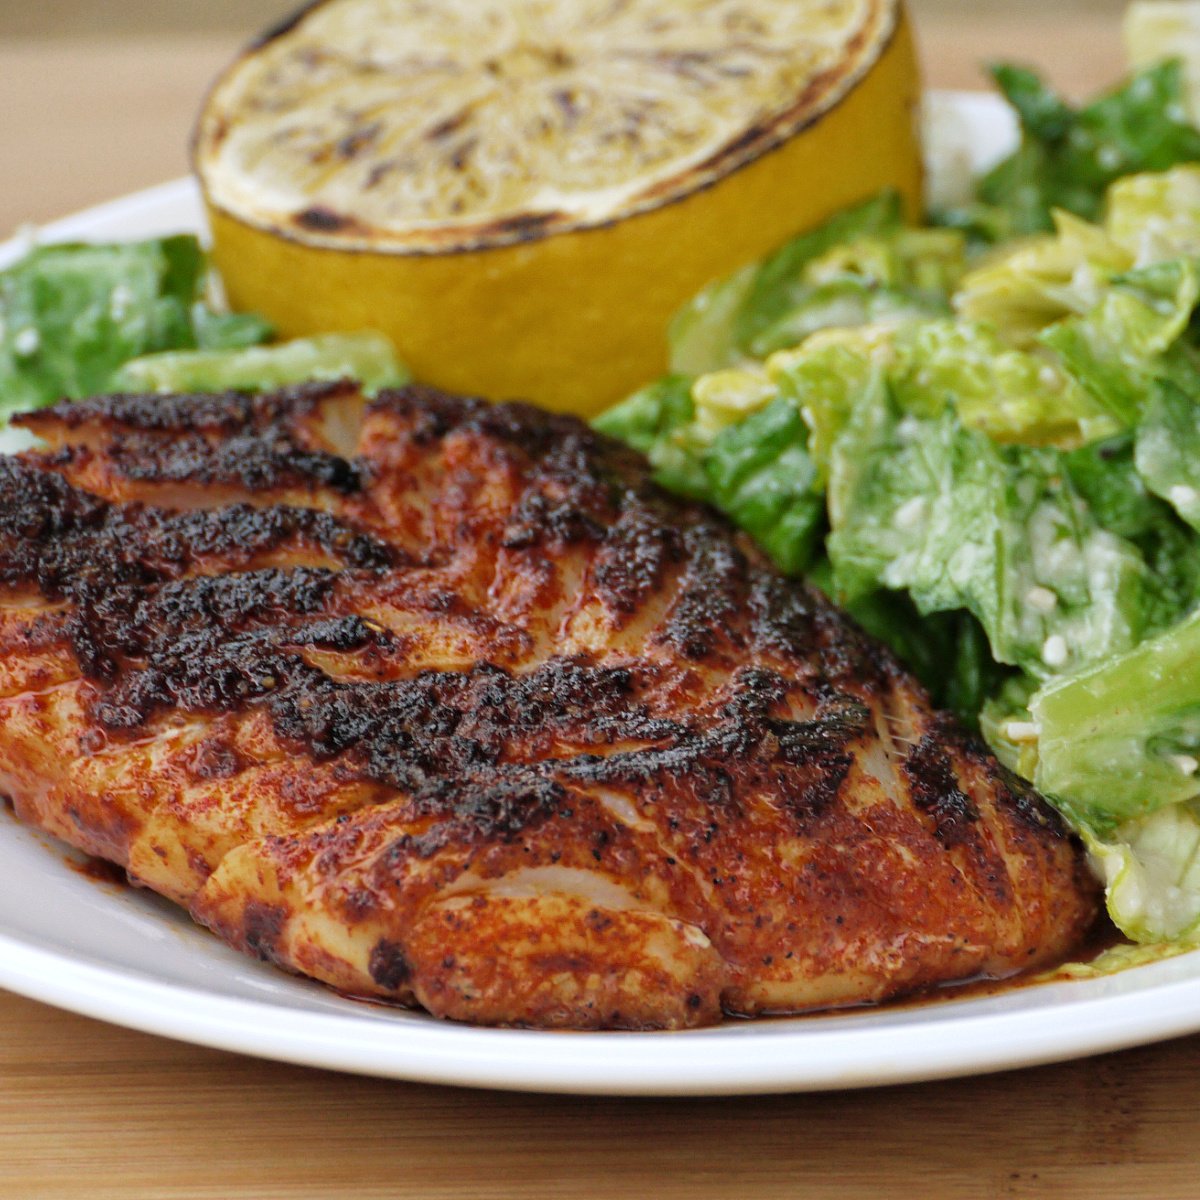 Spicy Pan-fried Blackened Rockfish, plated with a green salad and a grilled lemon.